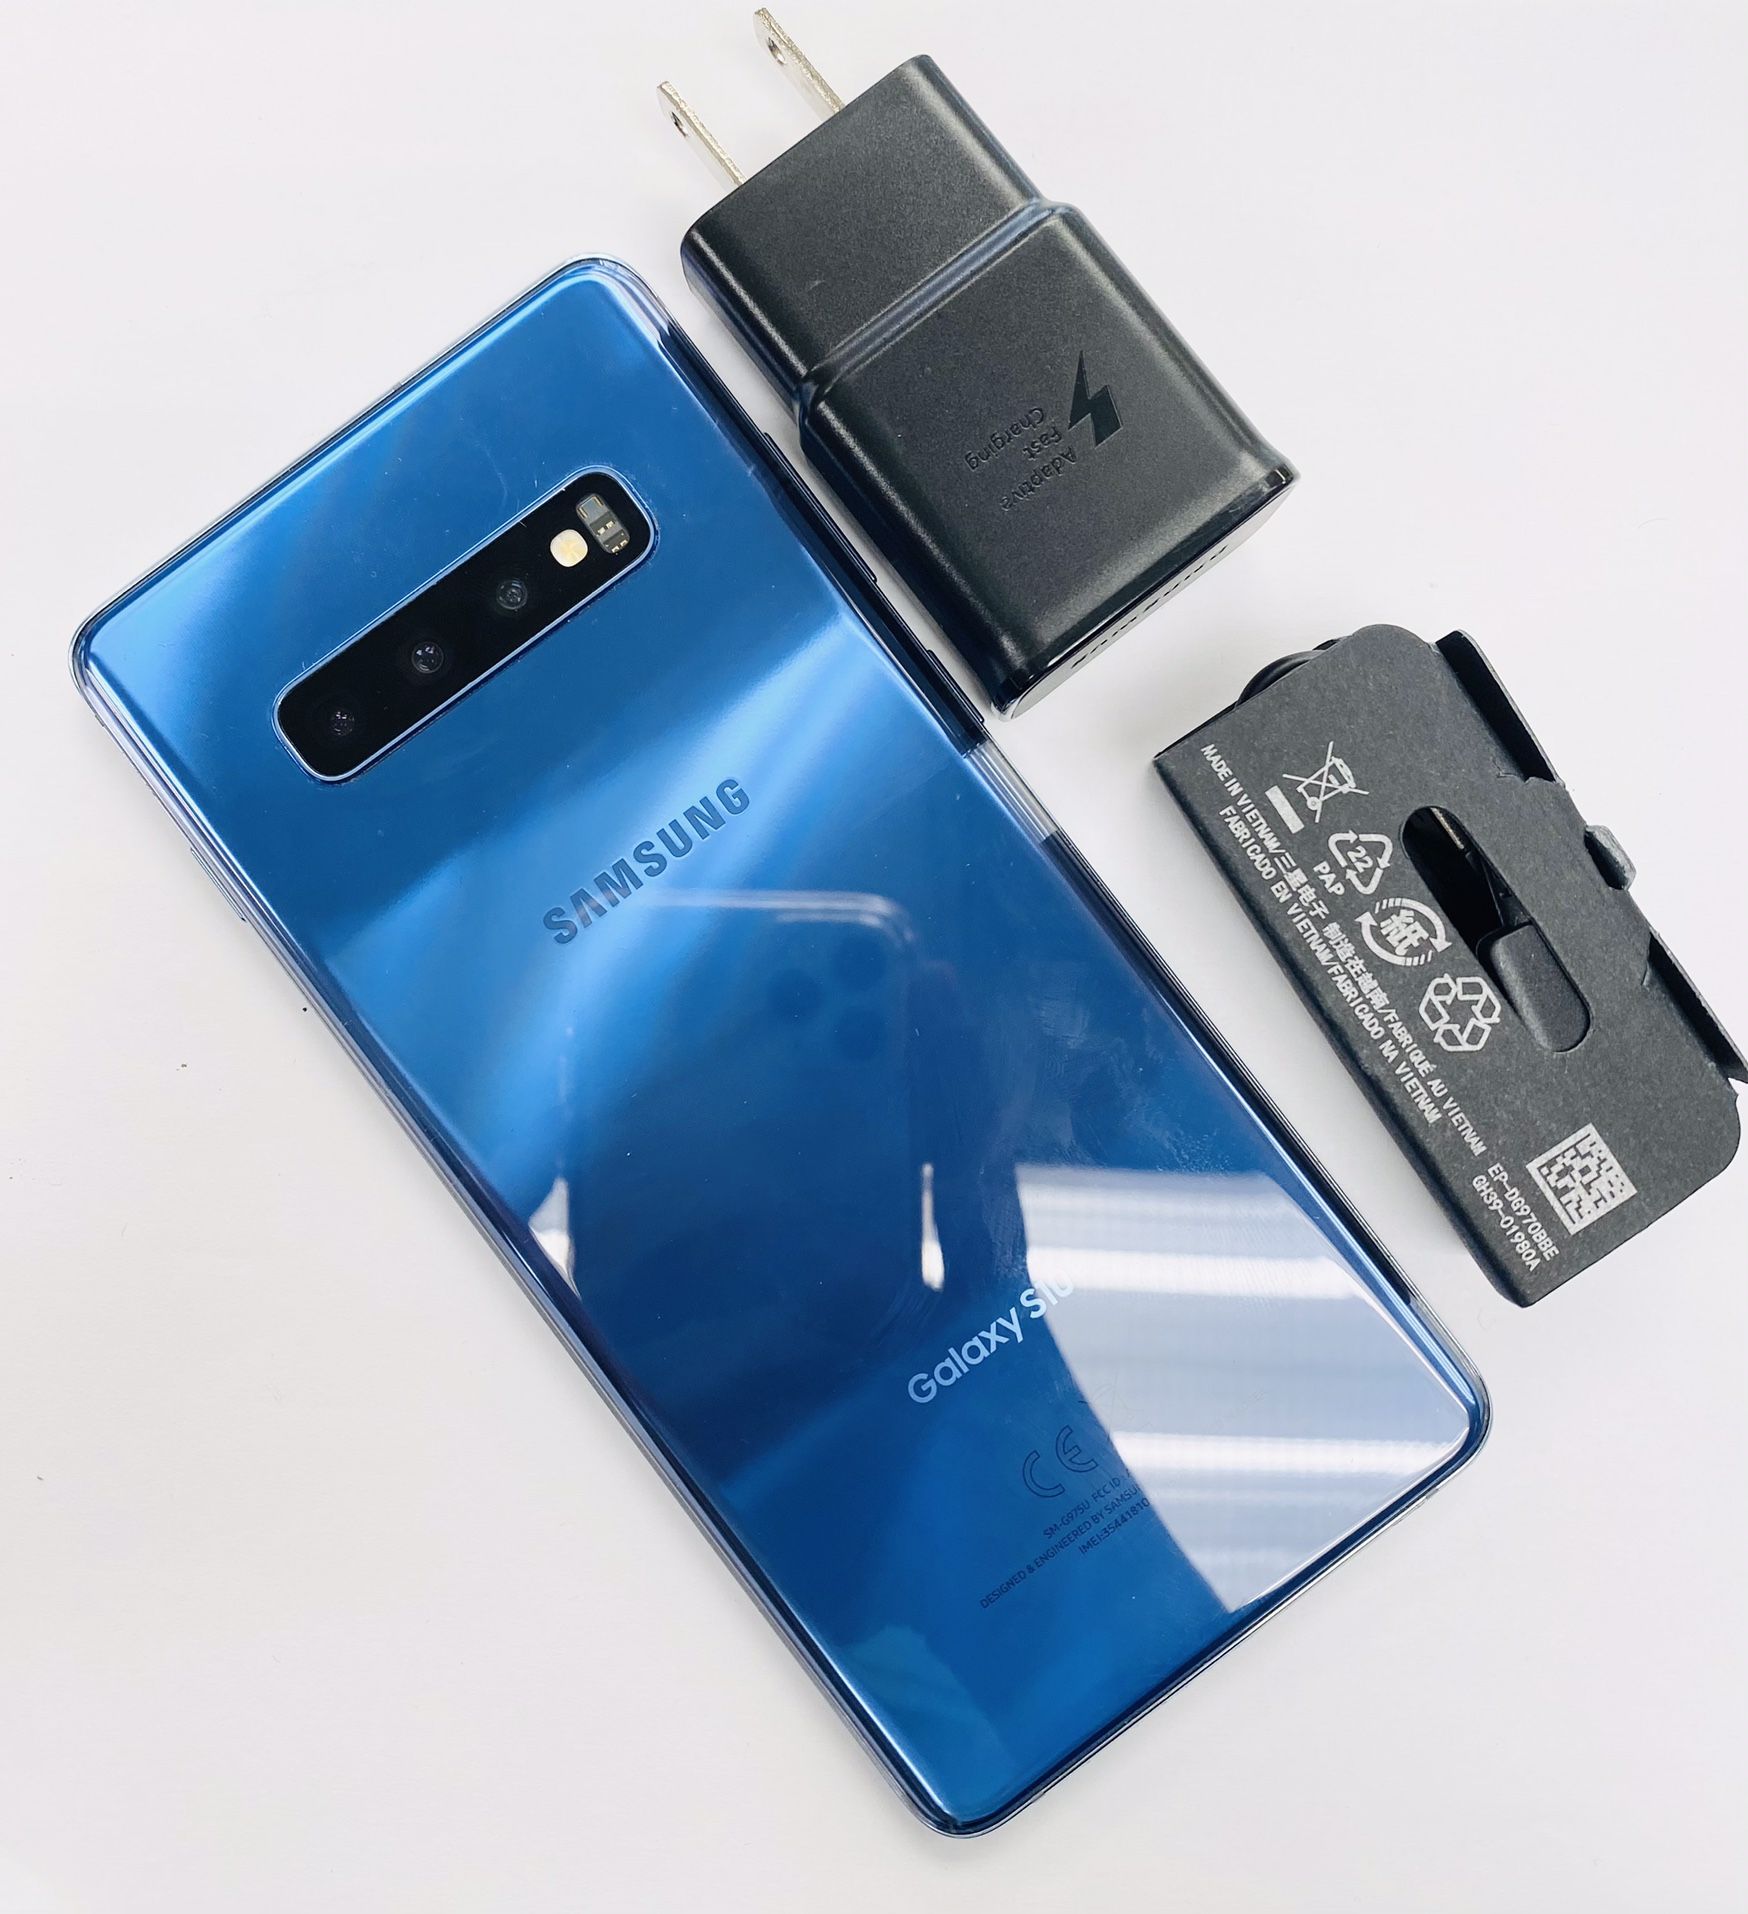 Samsung Galaxy S10 (128 gb) unlocked with store warranty for Sale